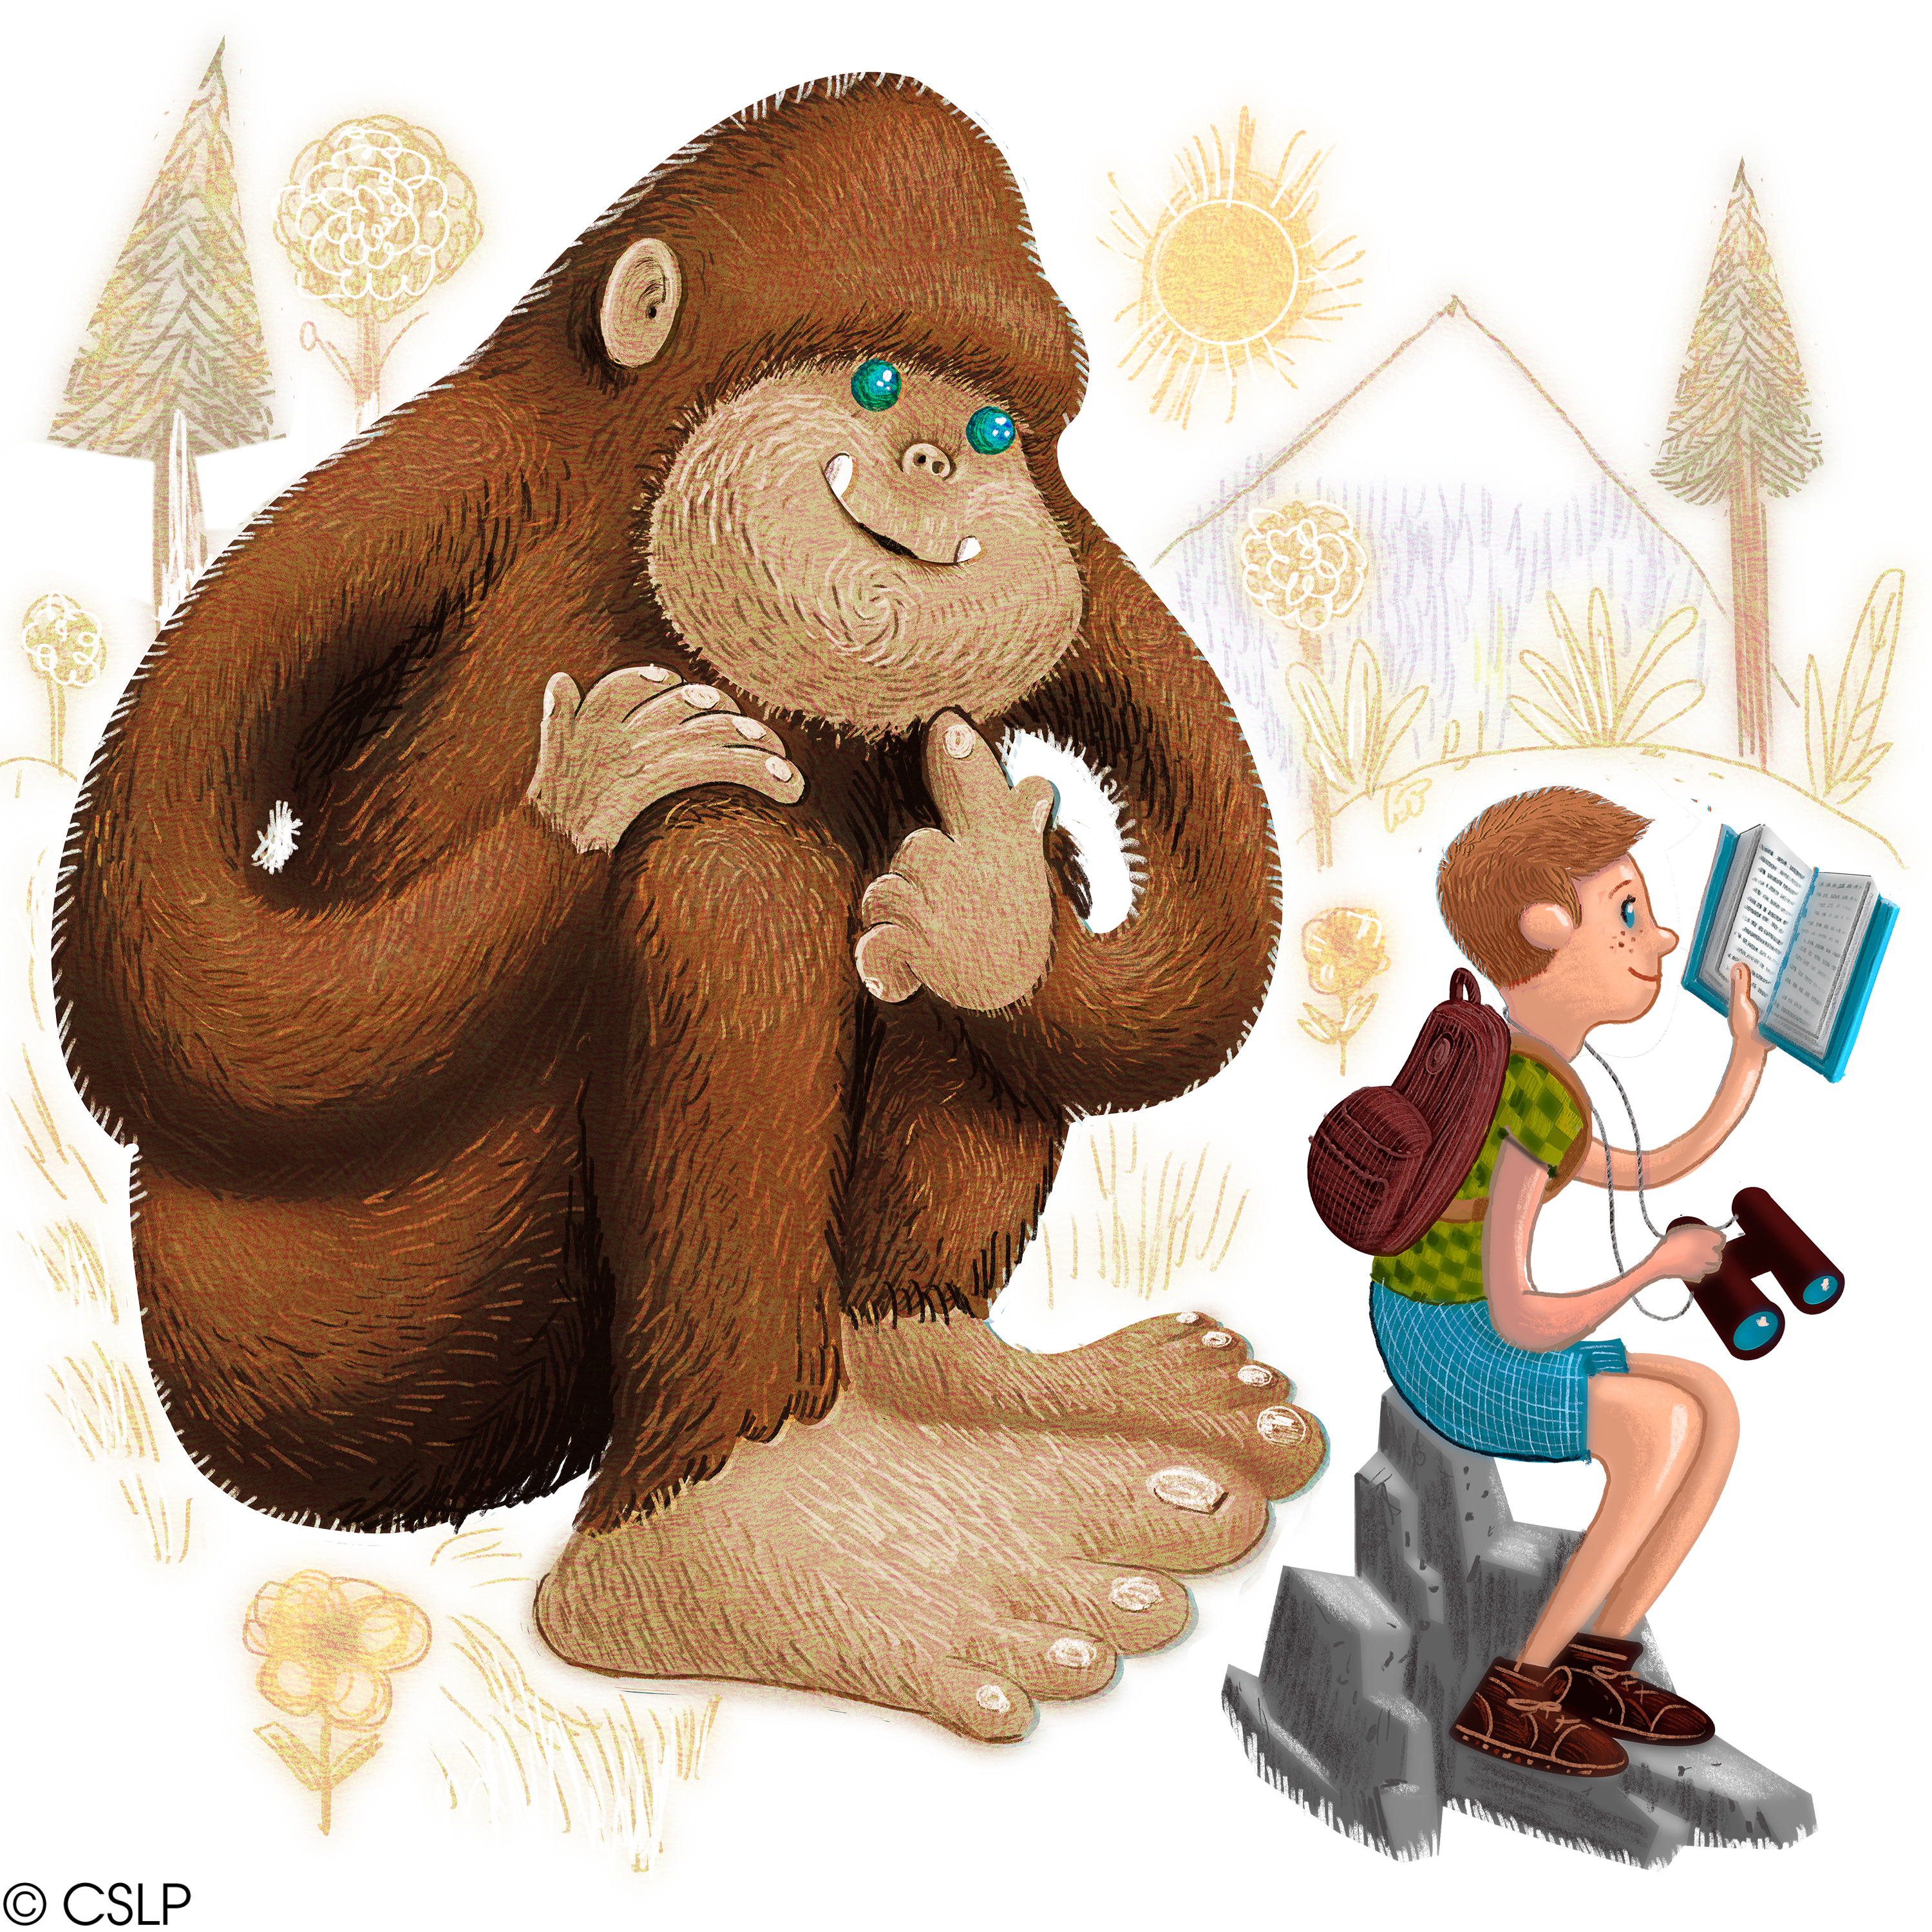 A cute bigfoot monster peers over the shoulder of a hiker, who has a book in one hand and binoculars in the other.